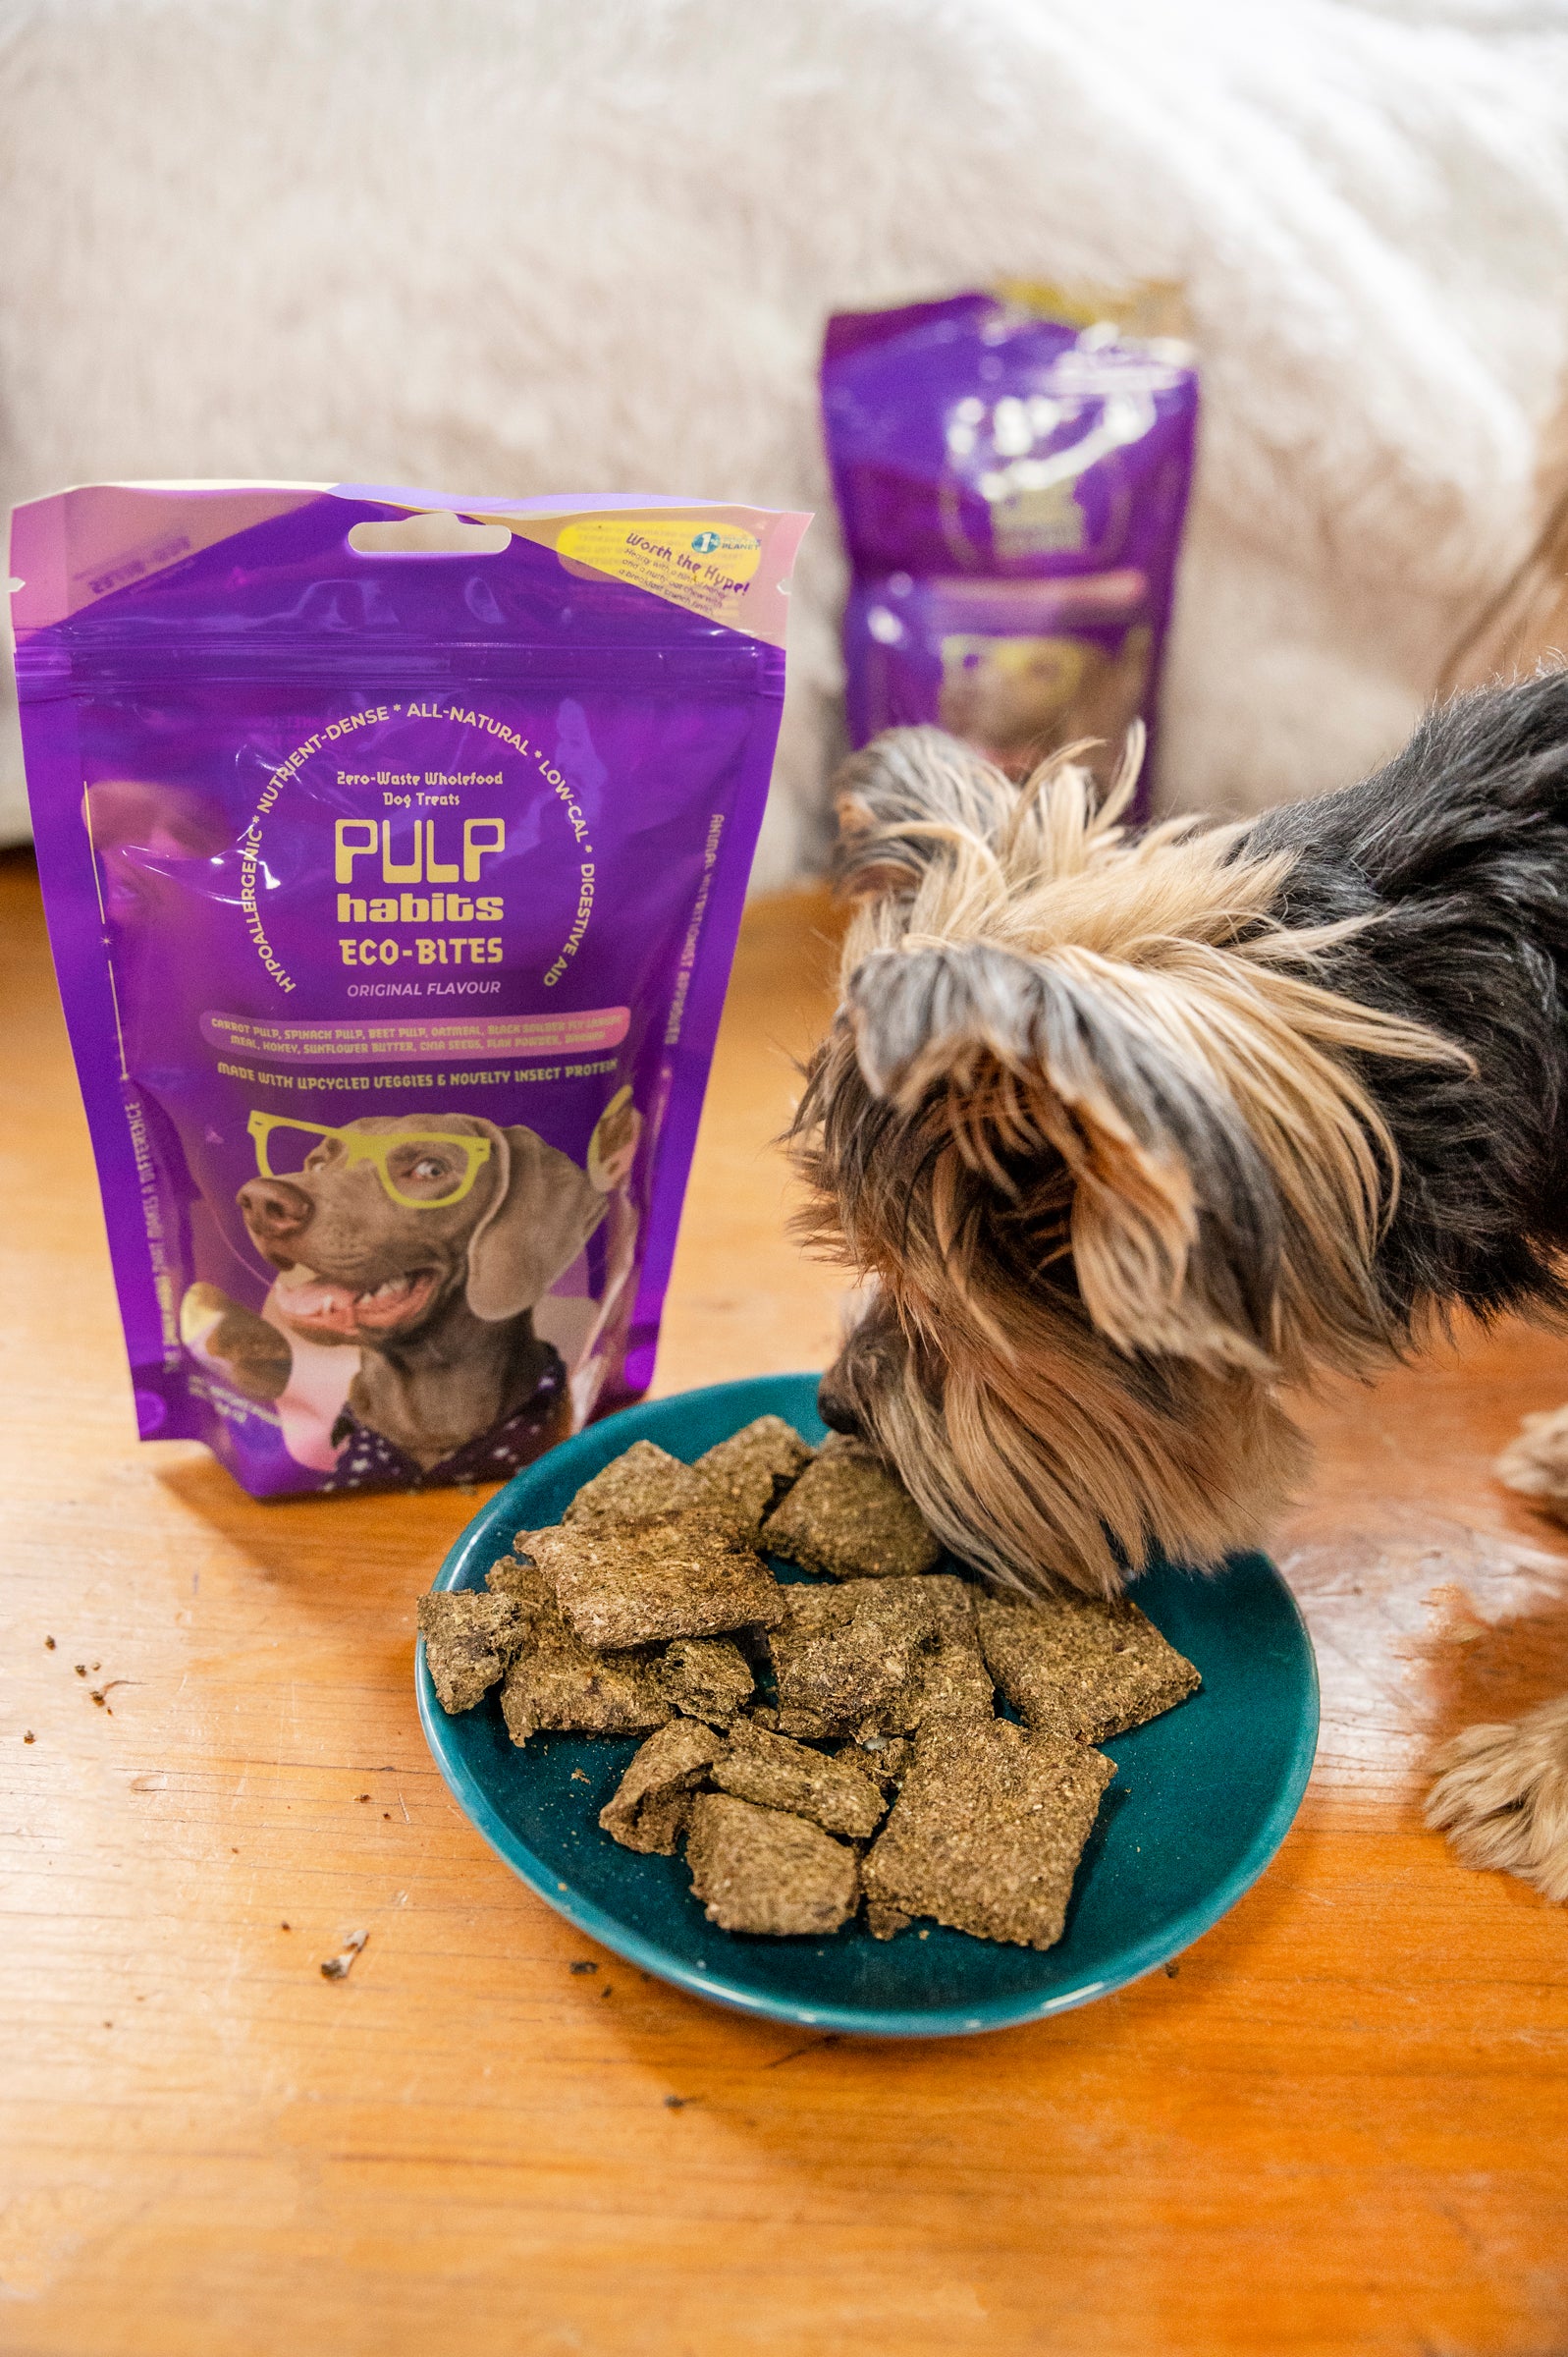 Let's Get Cooking! DIY Home-Made Dog Food Recipe Using Pulp Habits Eco-Bites